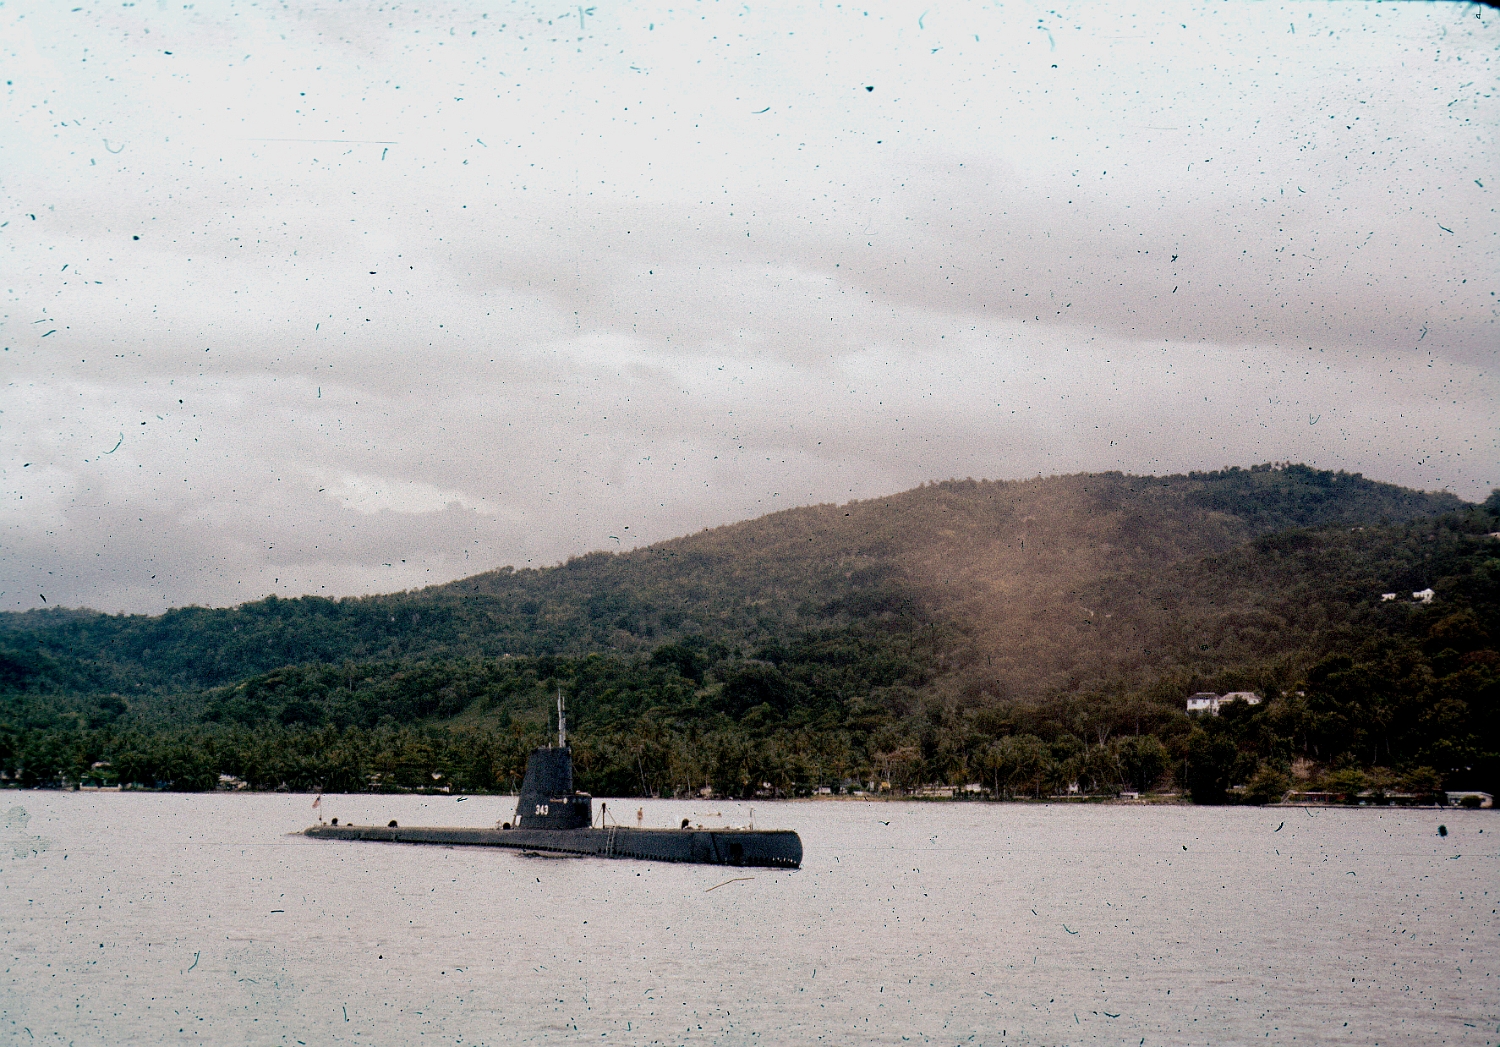 USS Clamagore, SS-343, our submarine partner in exercises.